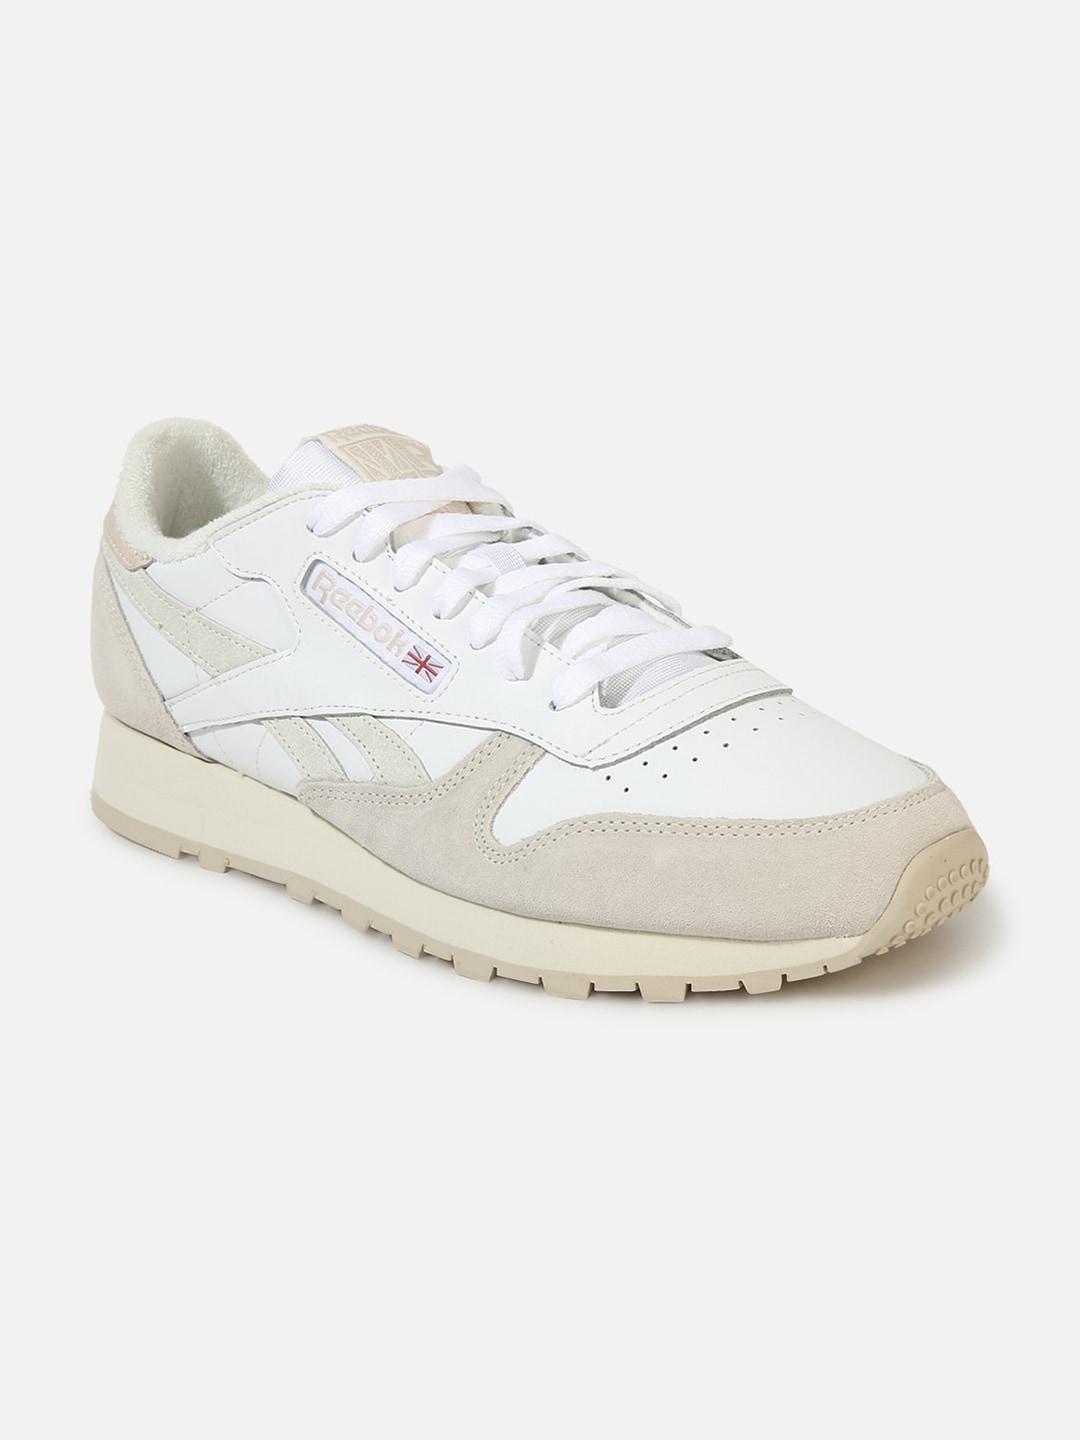 reebok-mens-classic-leather-running-sports-shoes